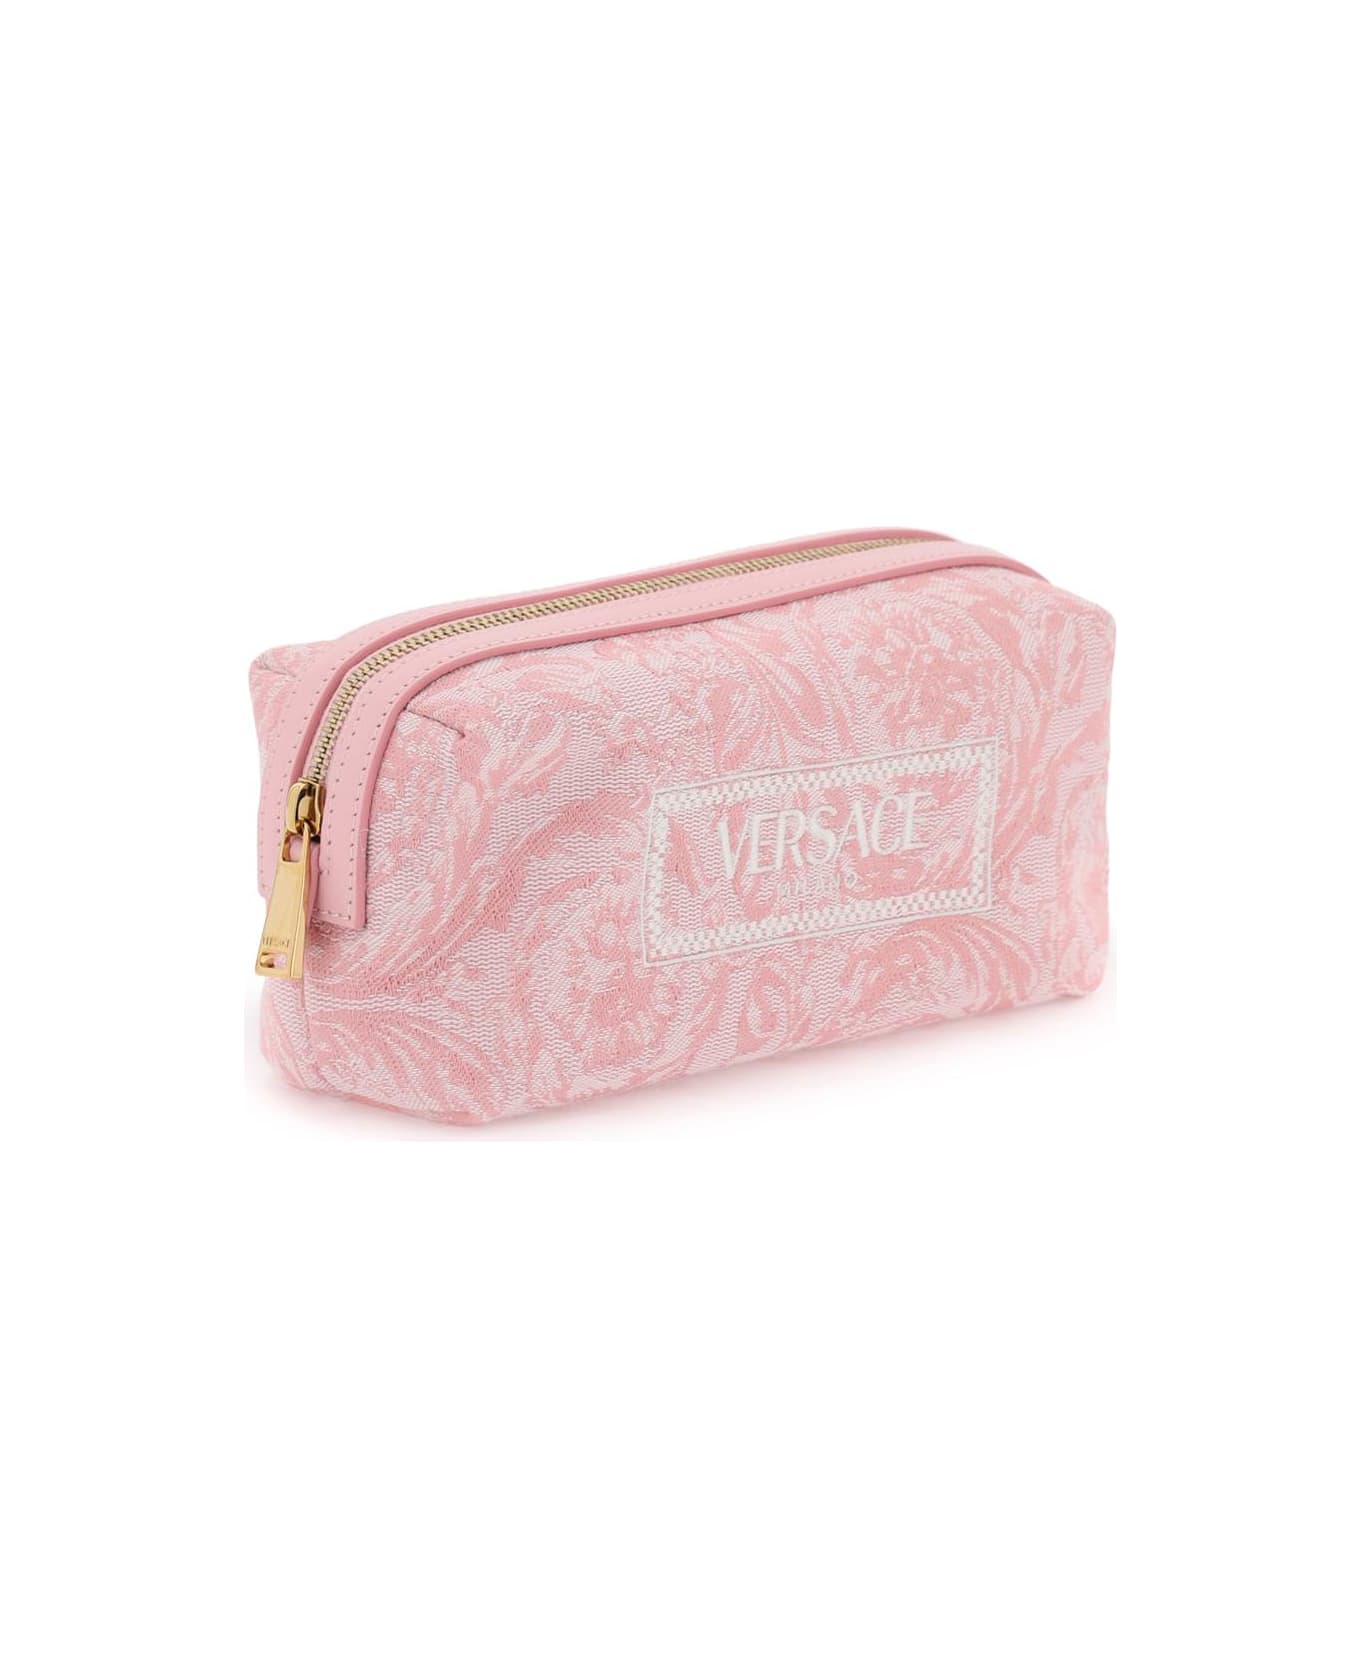 Versace Logo-embroidered Jacquard Zip-up Toiletry Bag - PALE PINK ENGLISH ROSE VE (Pink) クラッチバッグ